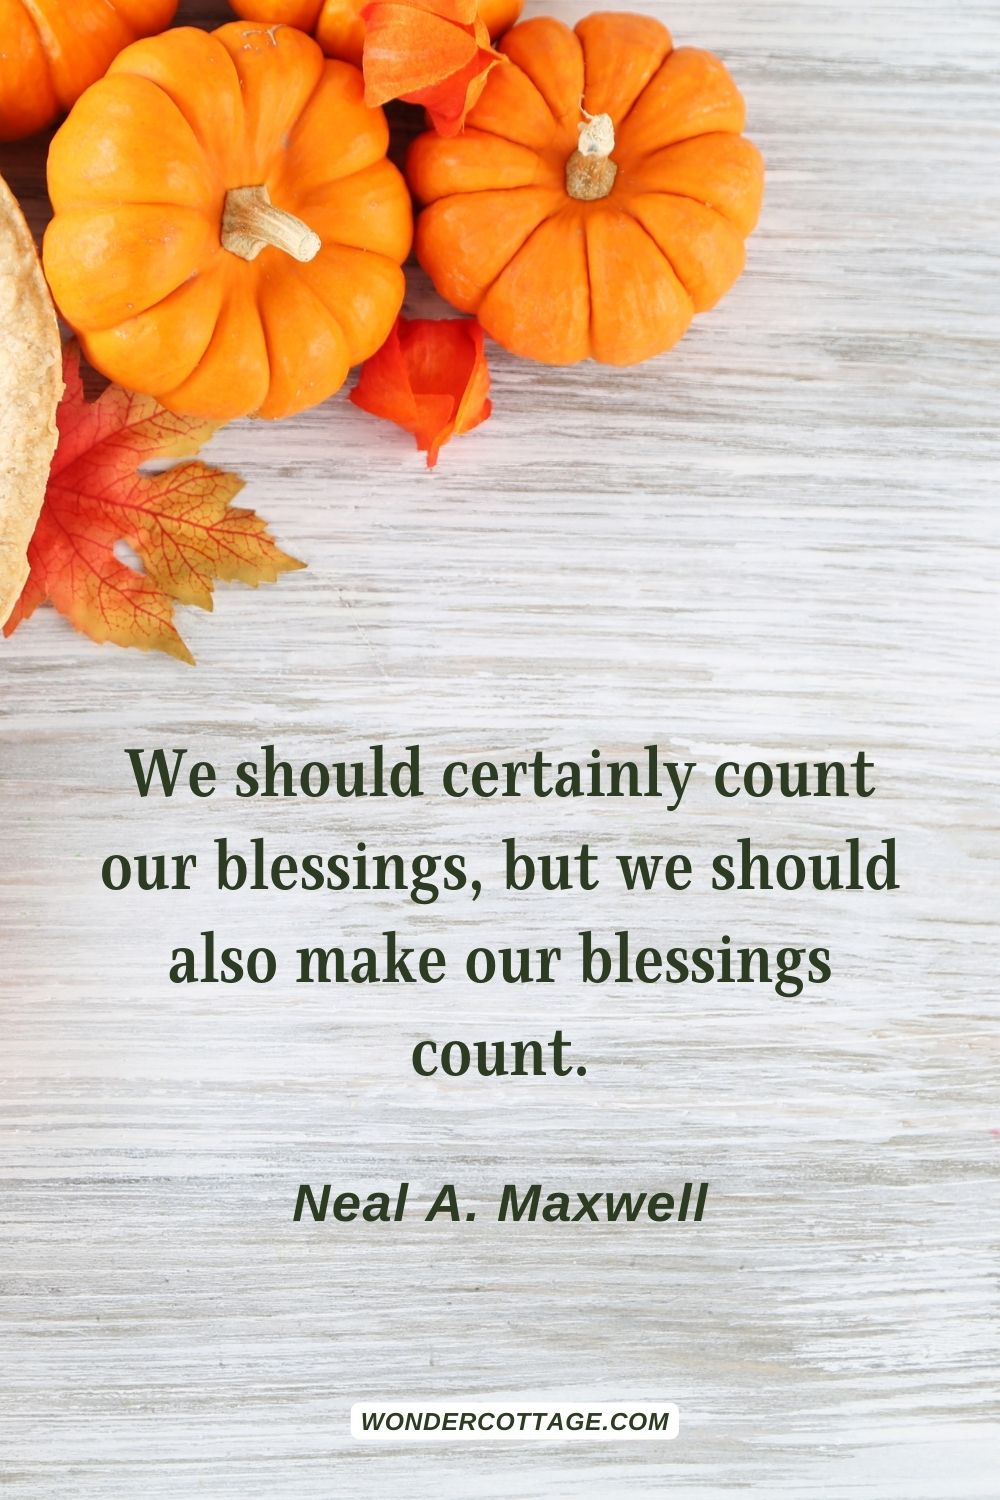 We should certainly count our blessings, but we should also make our blessings count. Neal A. Maxwell